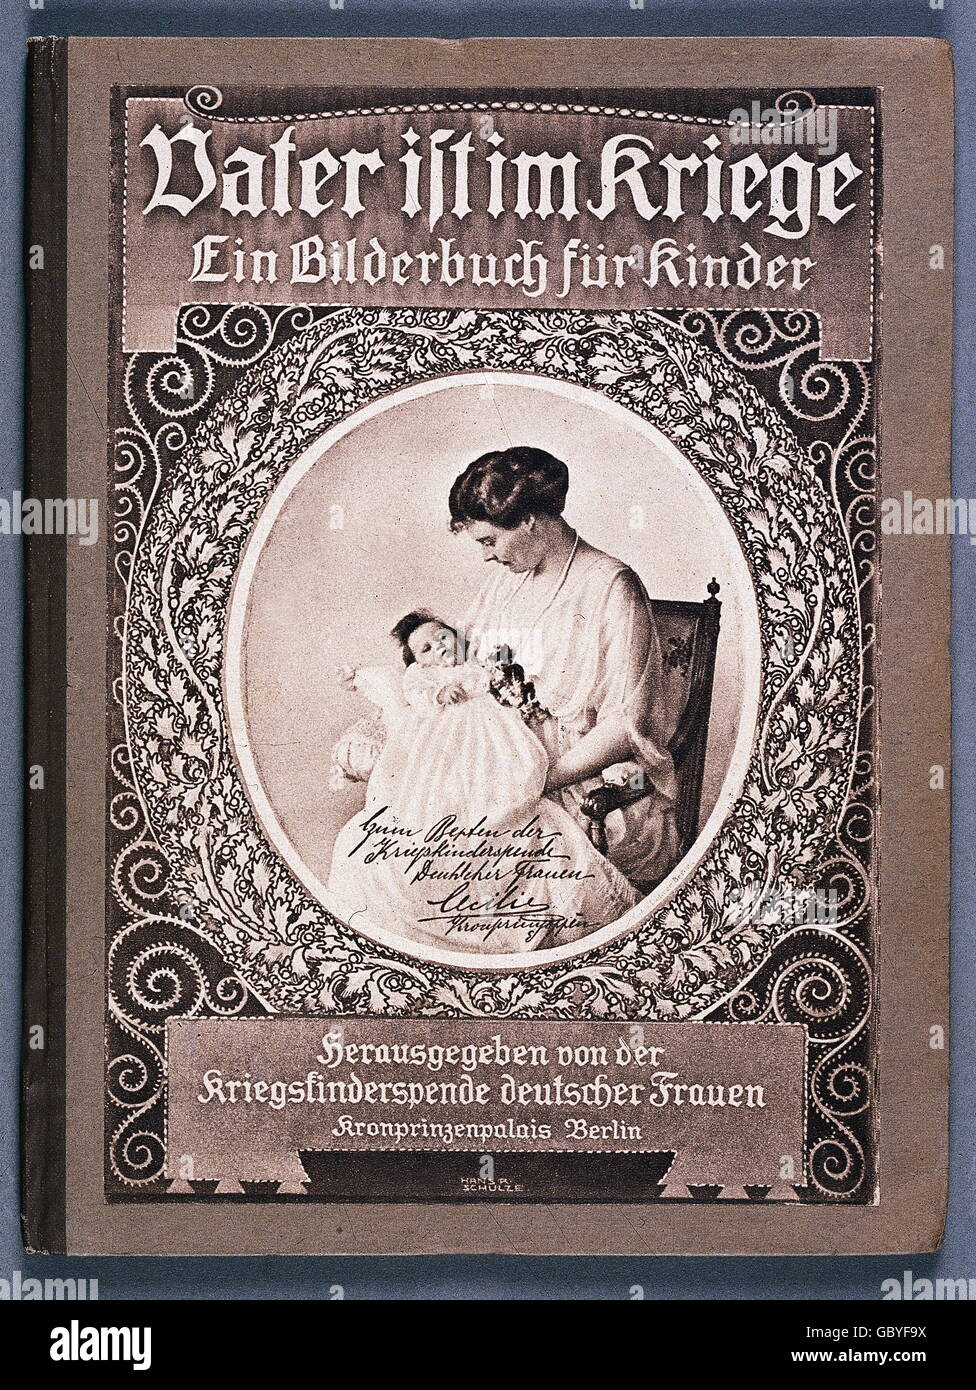 geography / travel, Germany, politics, propaganda, children's book 'Vater ist im Kriege', published by the war baby aid of German women, First World War / WWI, 1914 - 1918, Additional-Rights-Clearences-Not Available Stock Photo